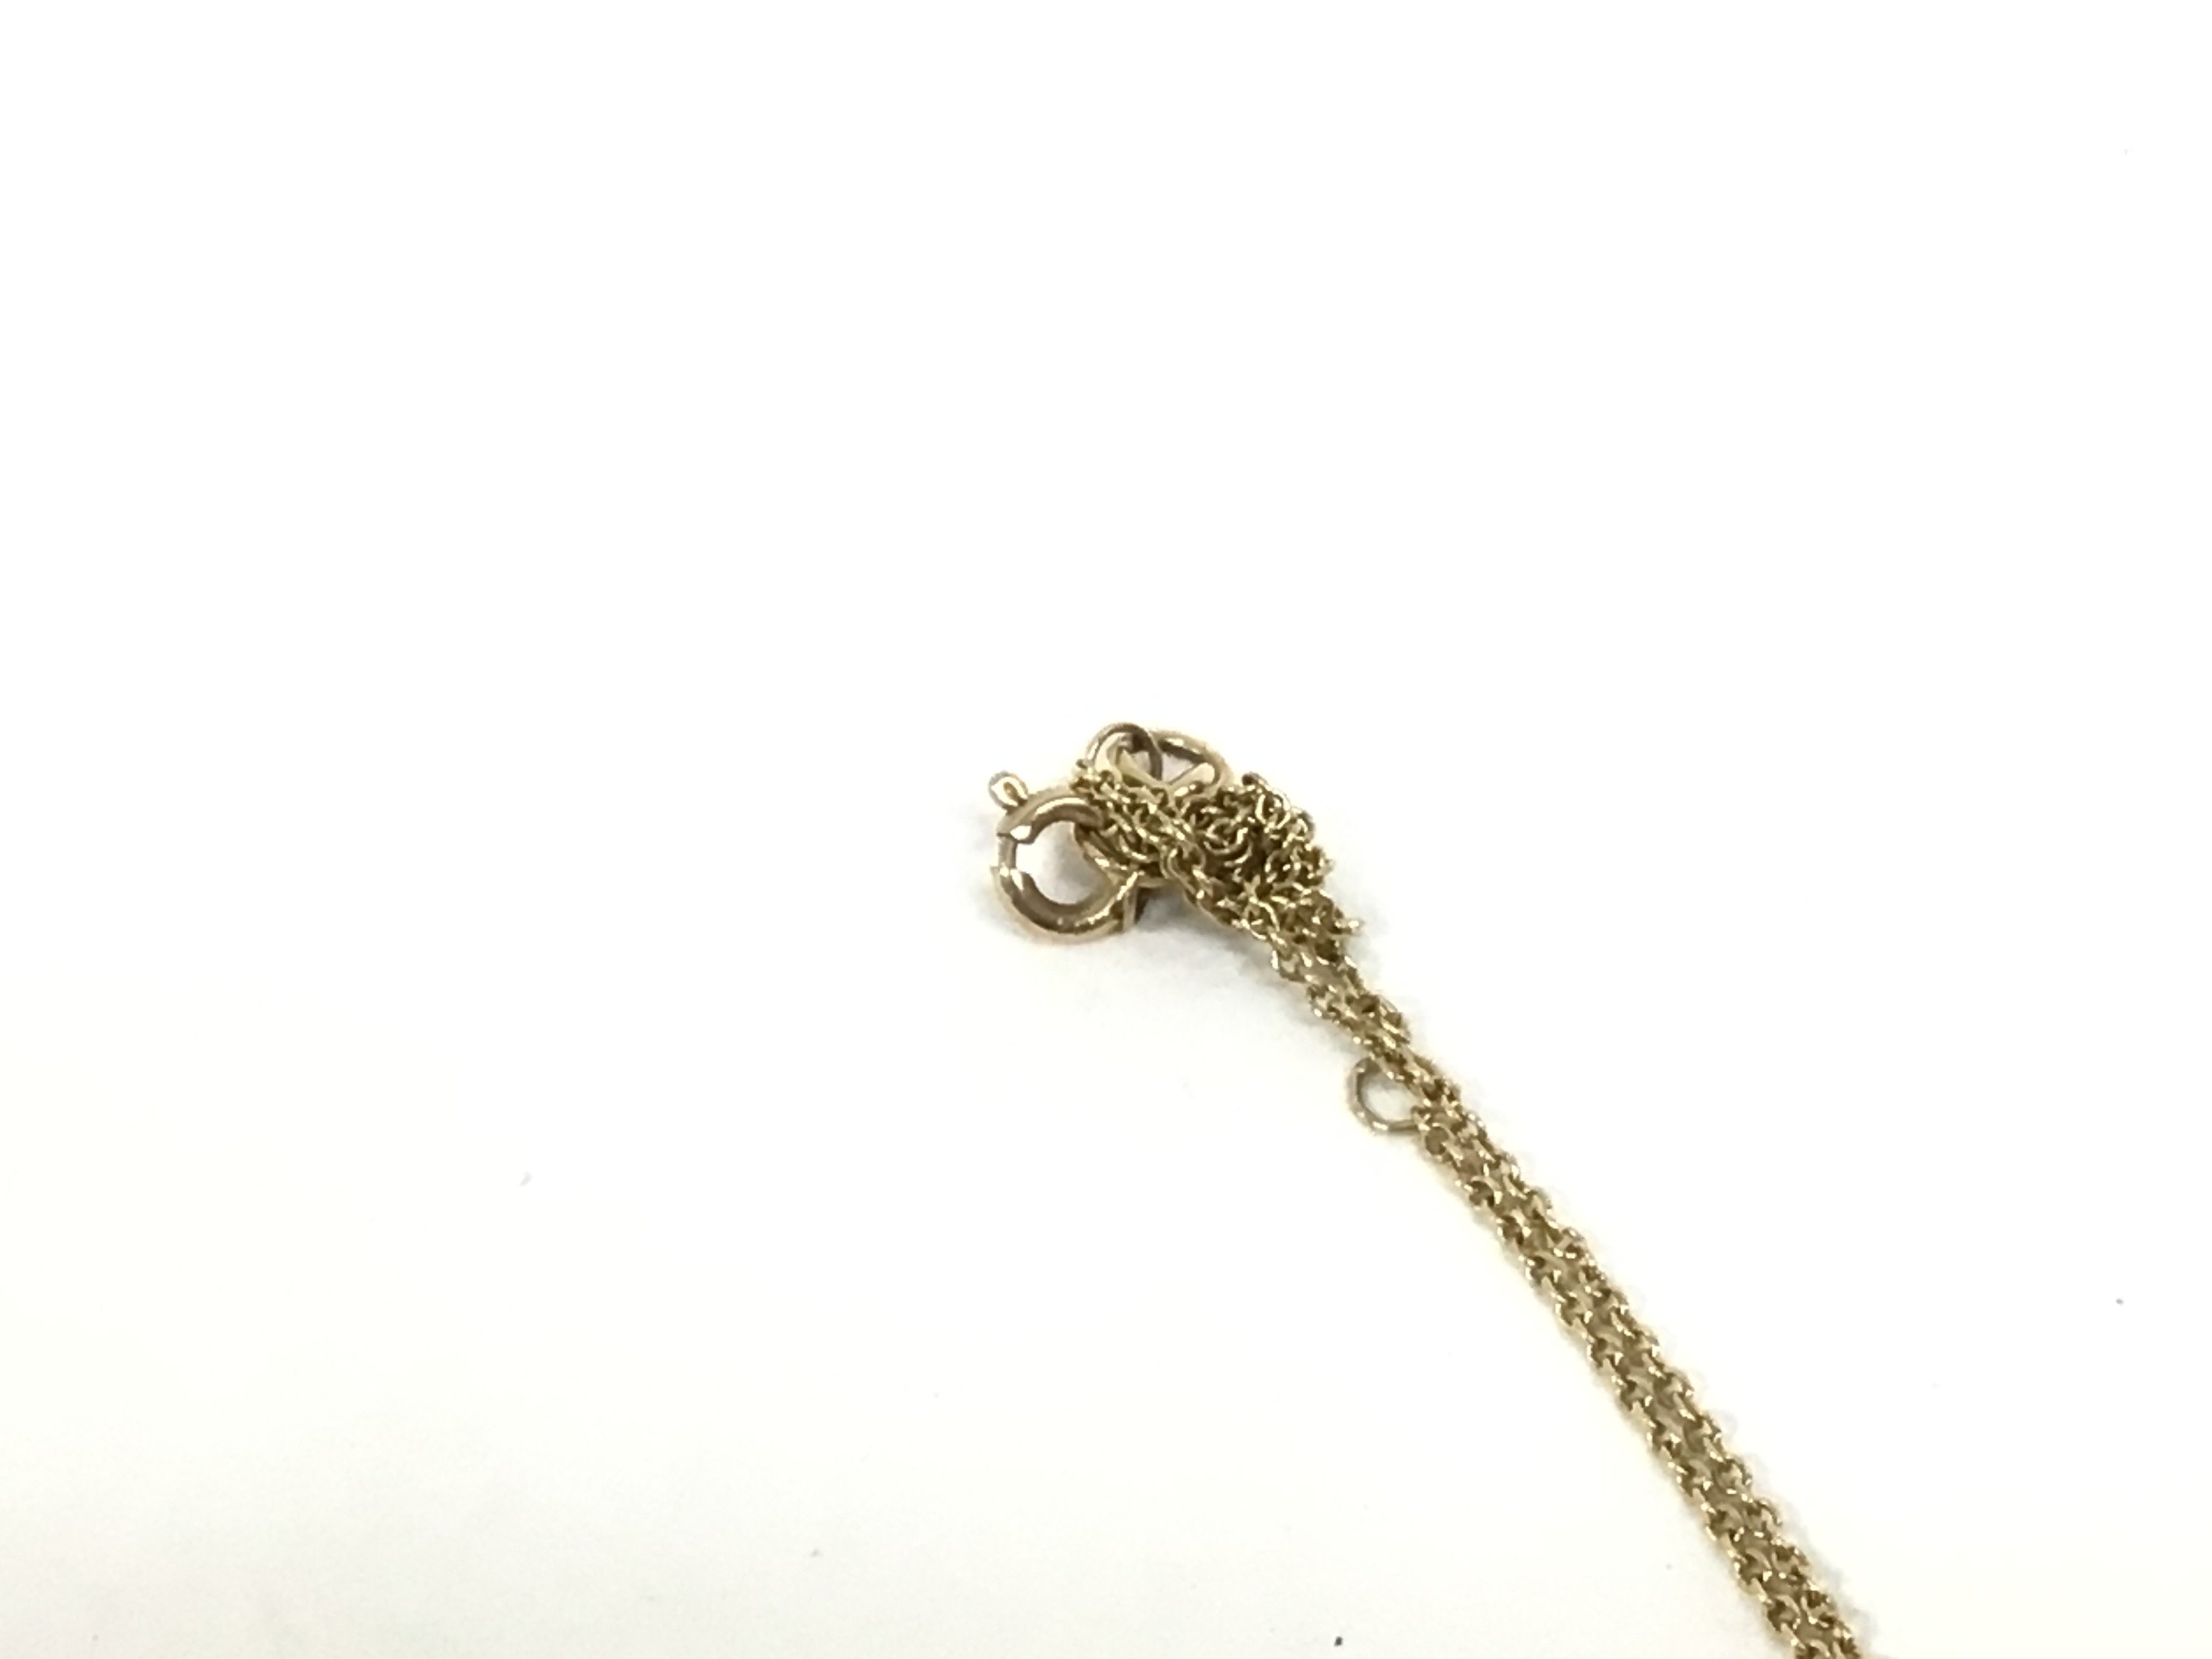 An 9ct gold pear shaped diamond pendant with chain - Image 2 of 2